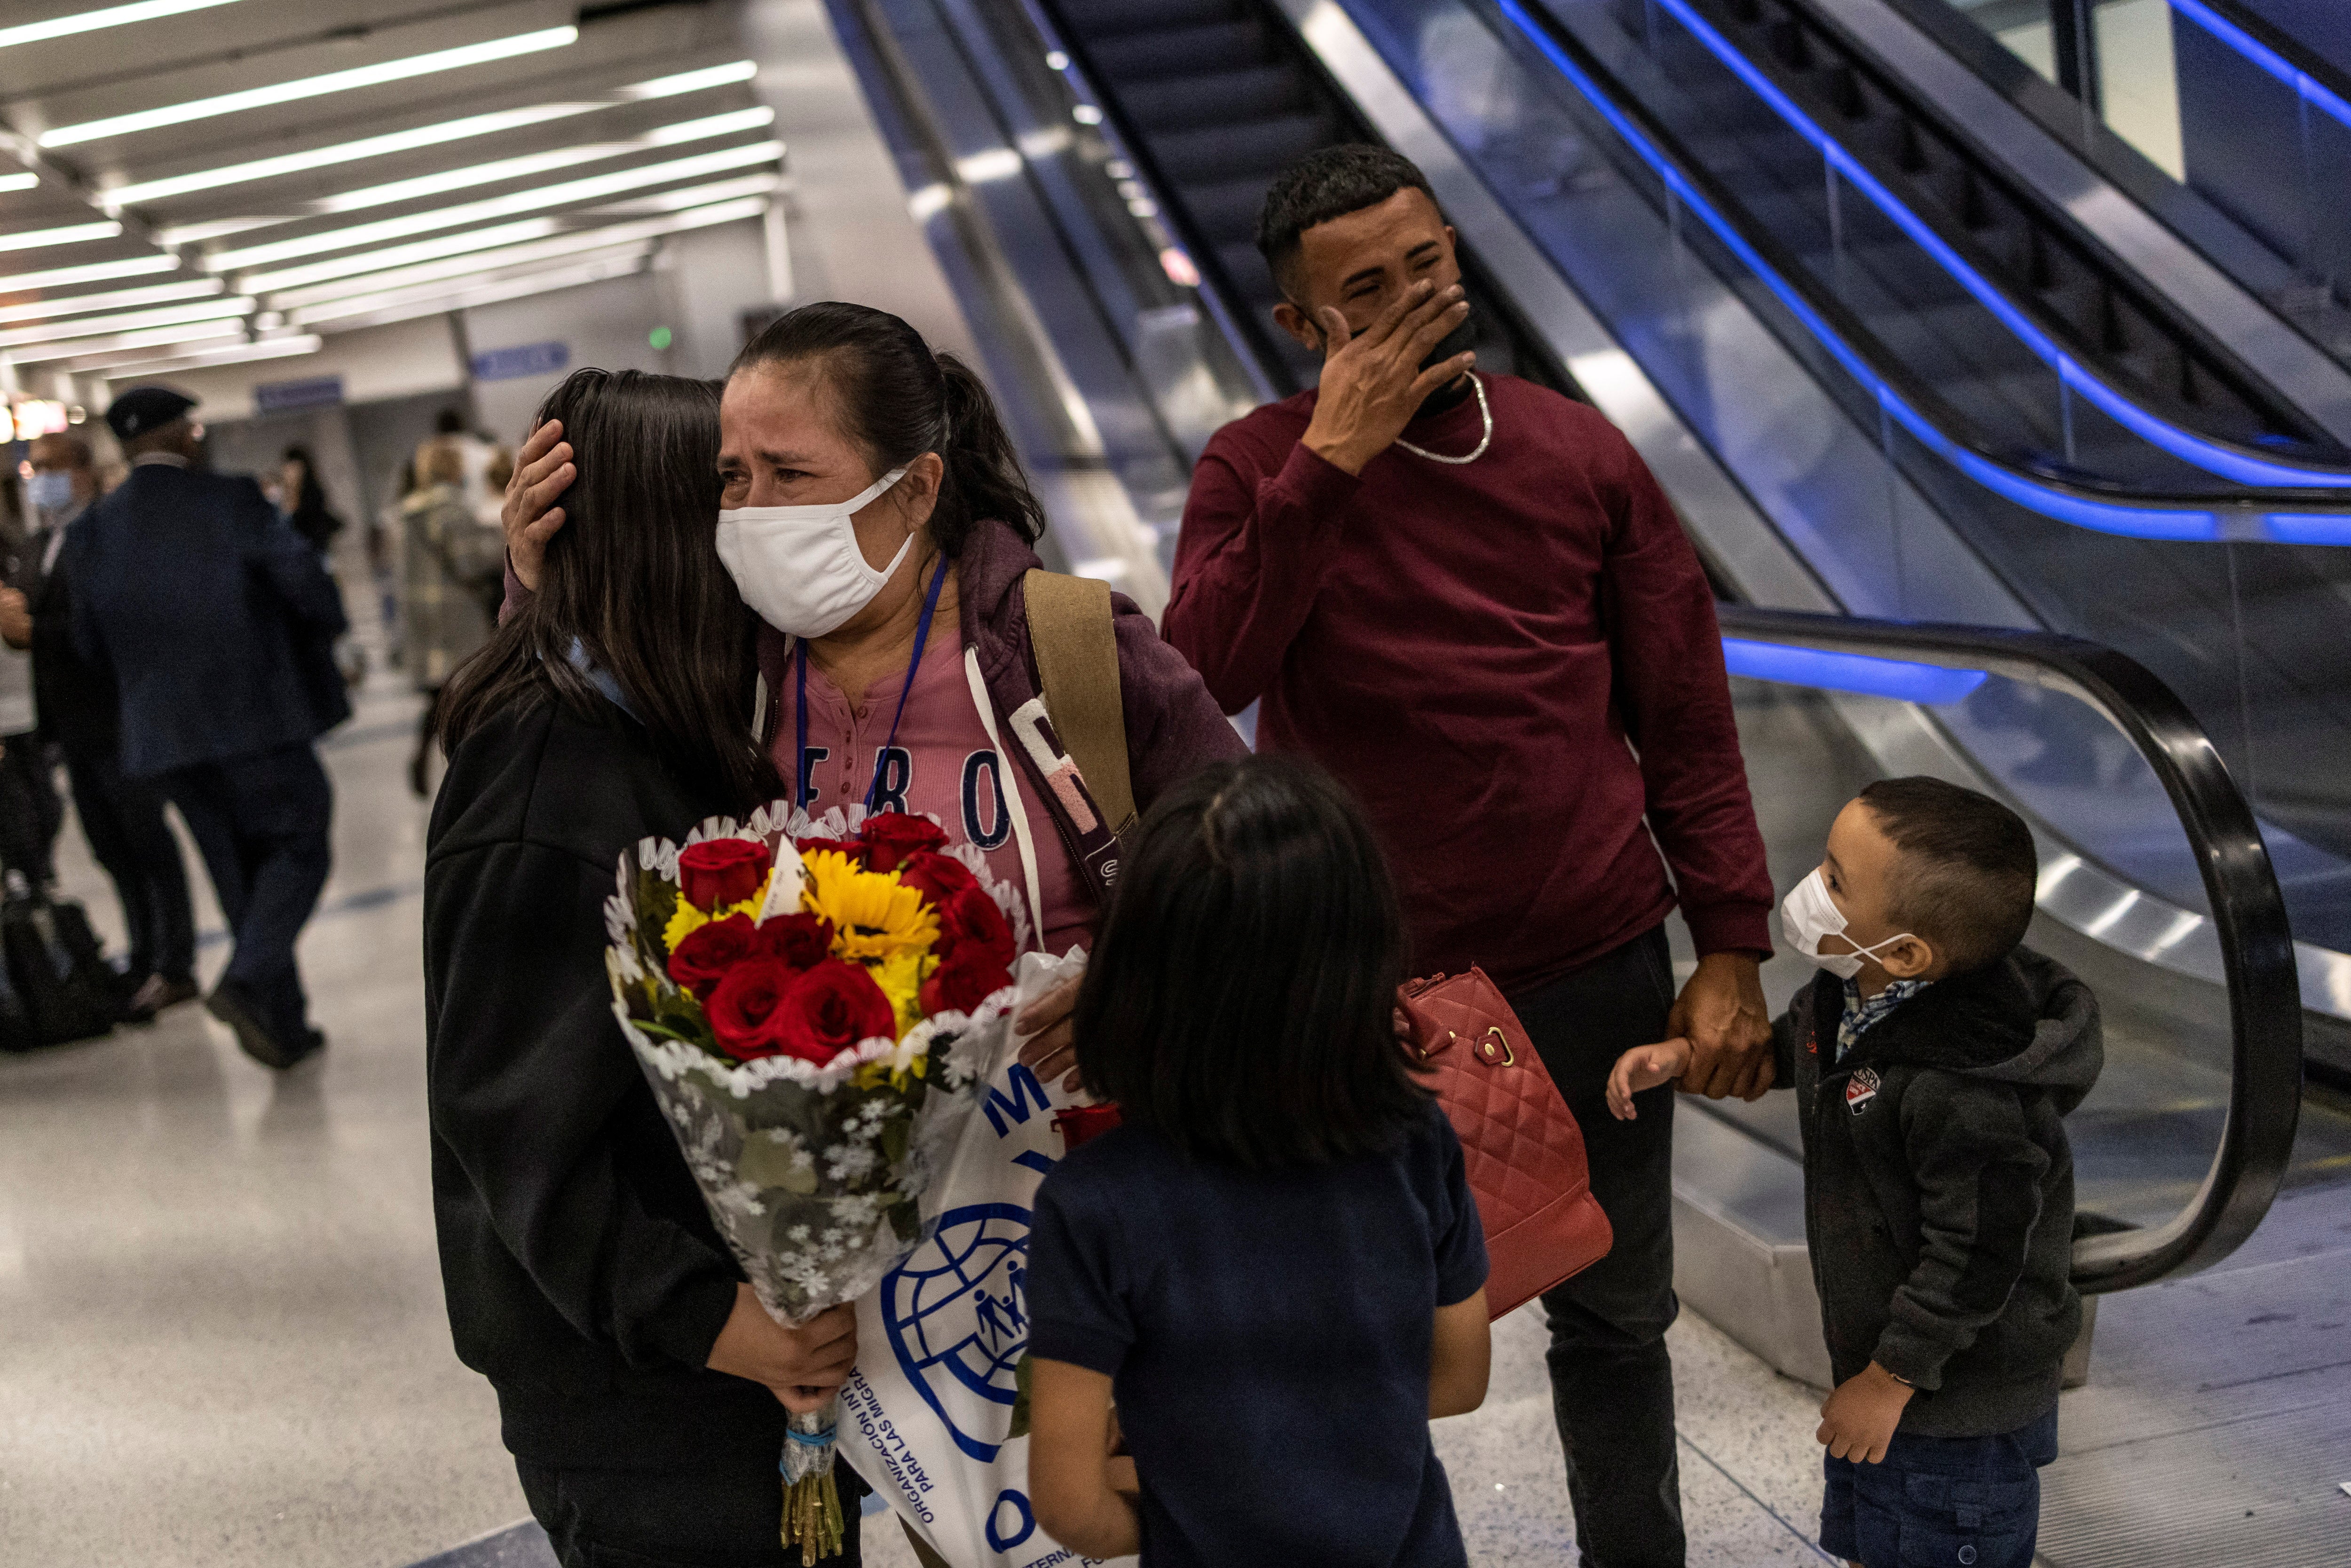 Maria Hernandez (centre) hugs her daughter Michelle, while her son Maynor (second from right) is overcome with emotion during their reunion at Los Angeles international airport